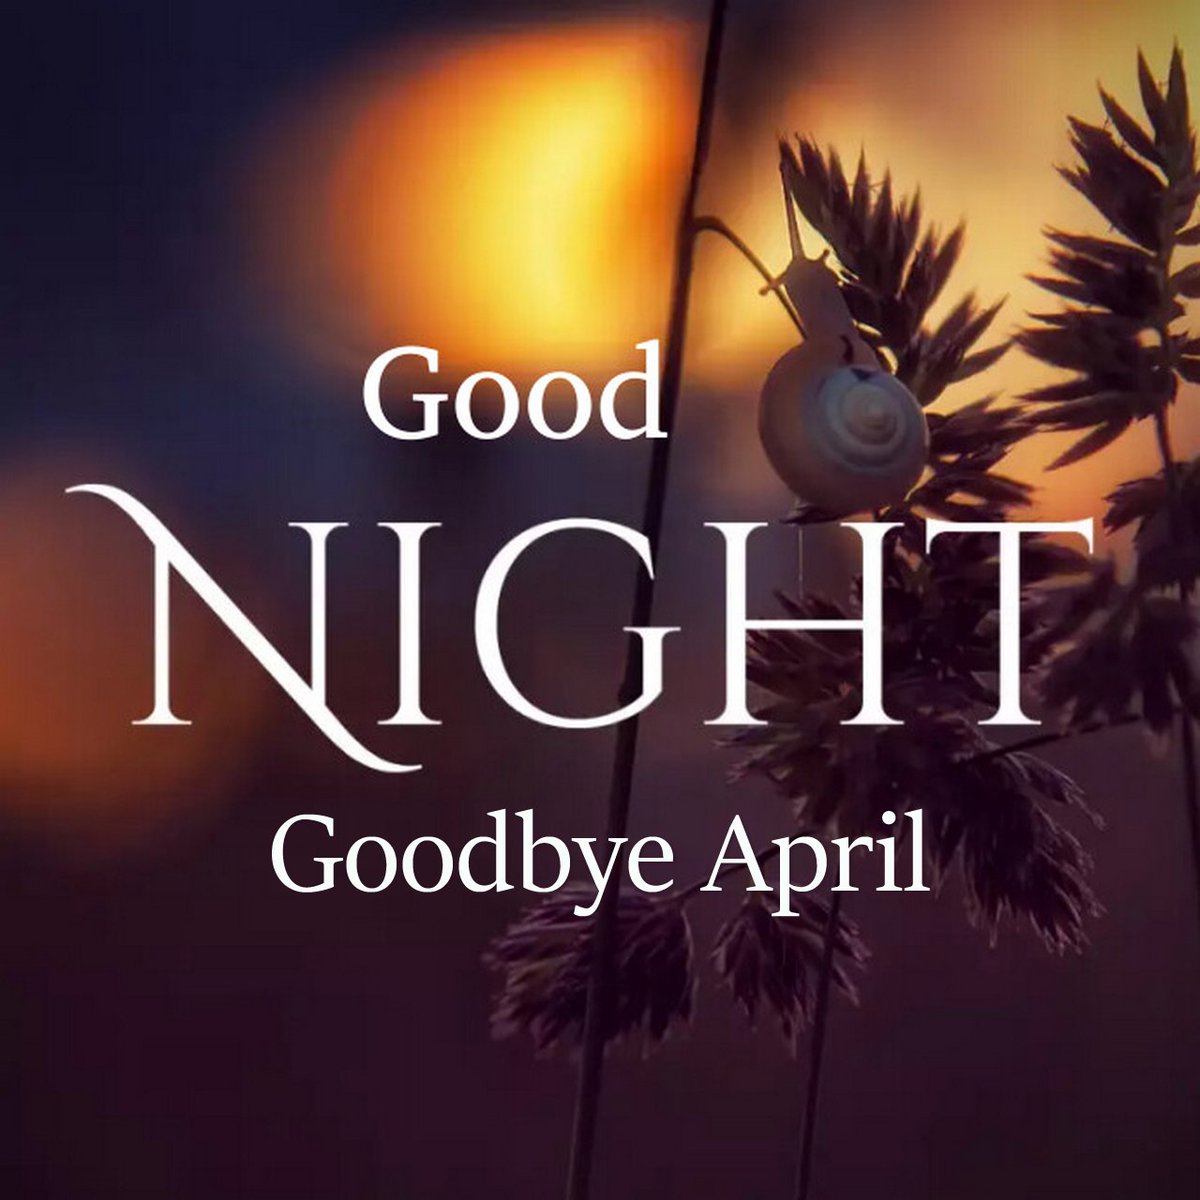 - The month of April ends, a new month begins and the heart full of plans... Gratitude for what ends and faith in what is to come! Sleep well! Sweet dreams! -